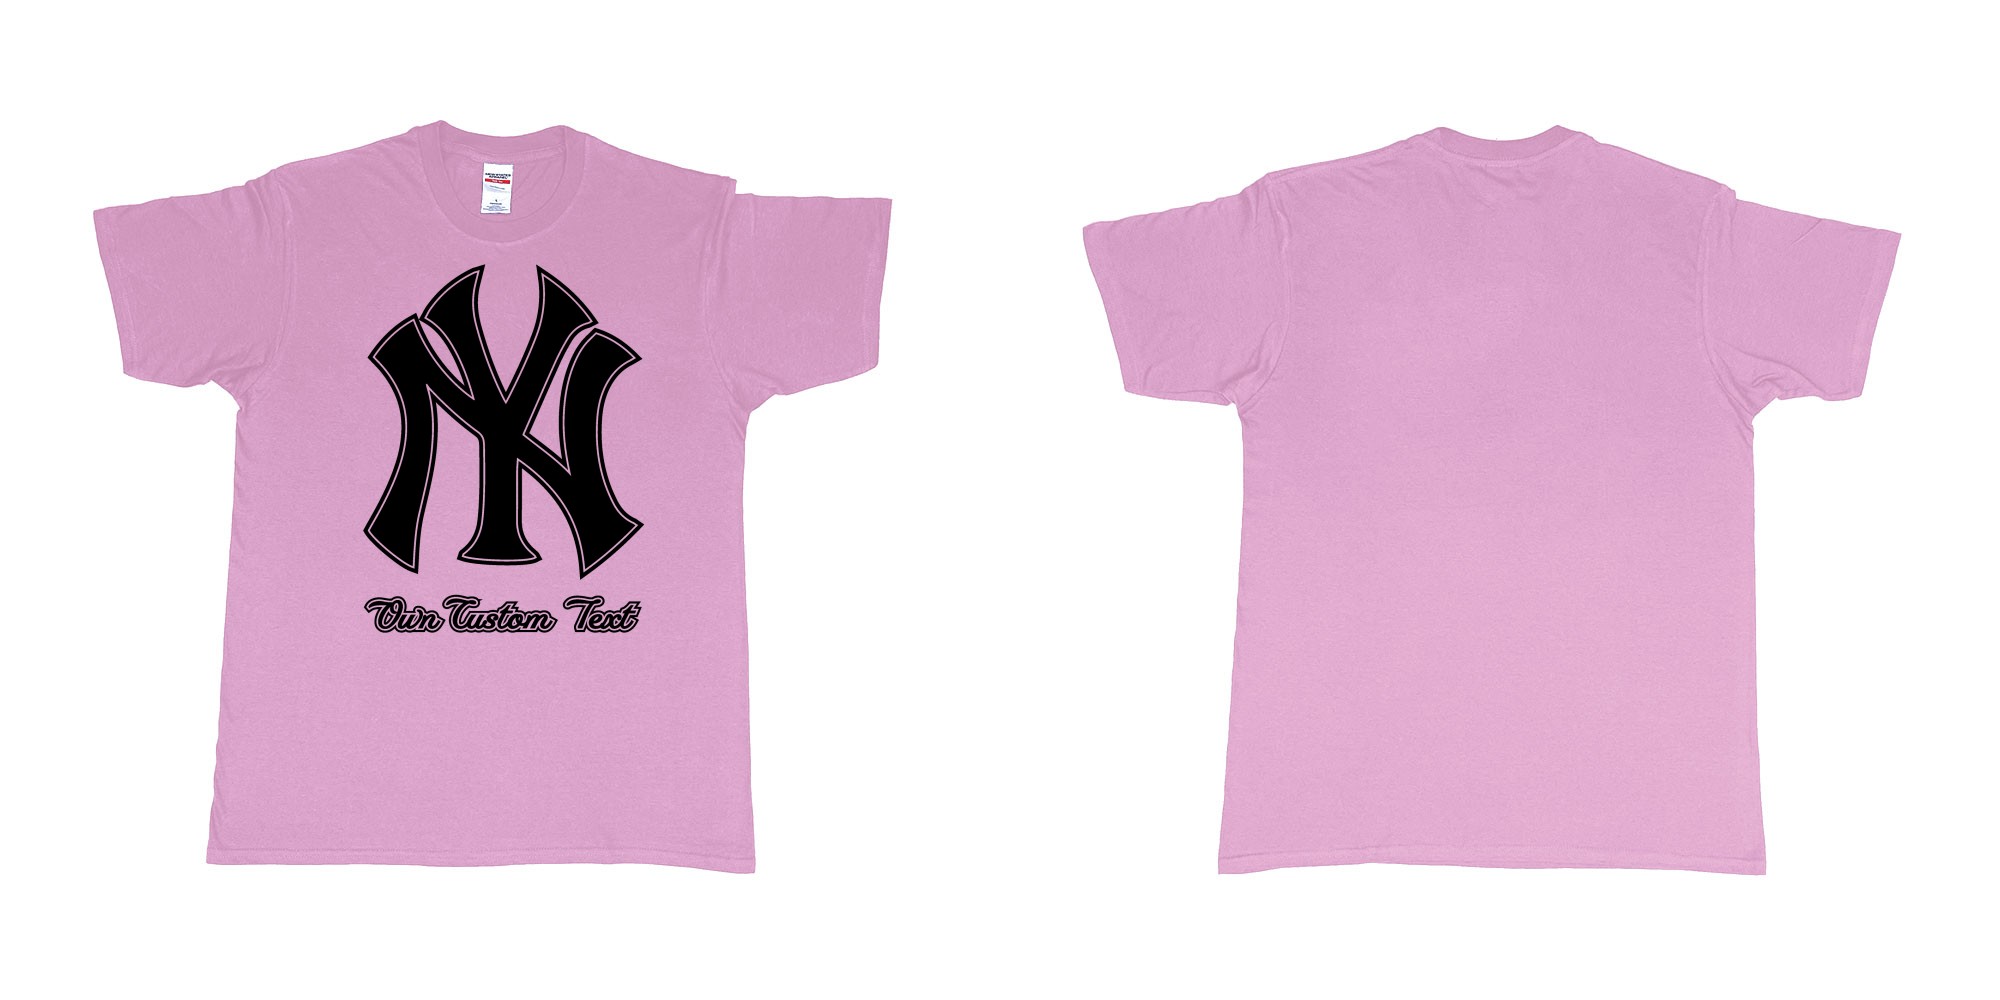 Custom tshirt design new york yankees baseball team custom design in fabric color light-pink choice your own text made in Bali by The Pirate Way